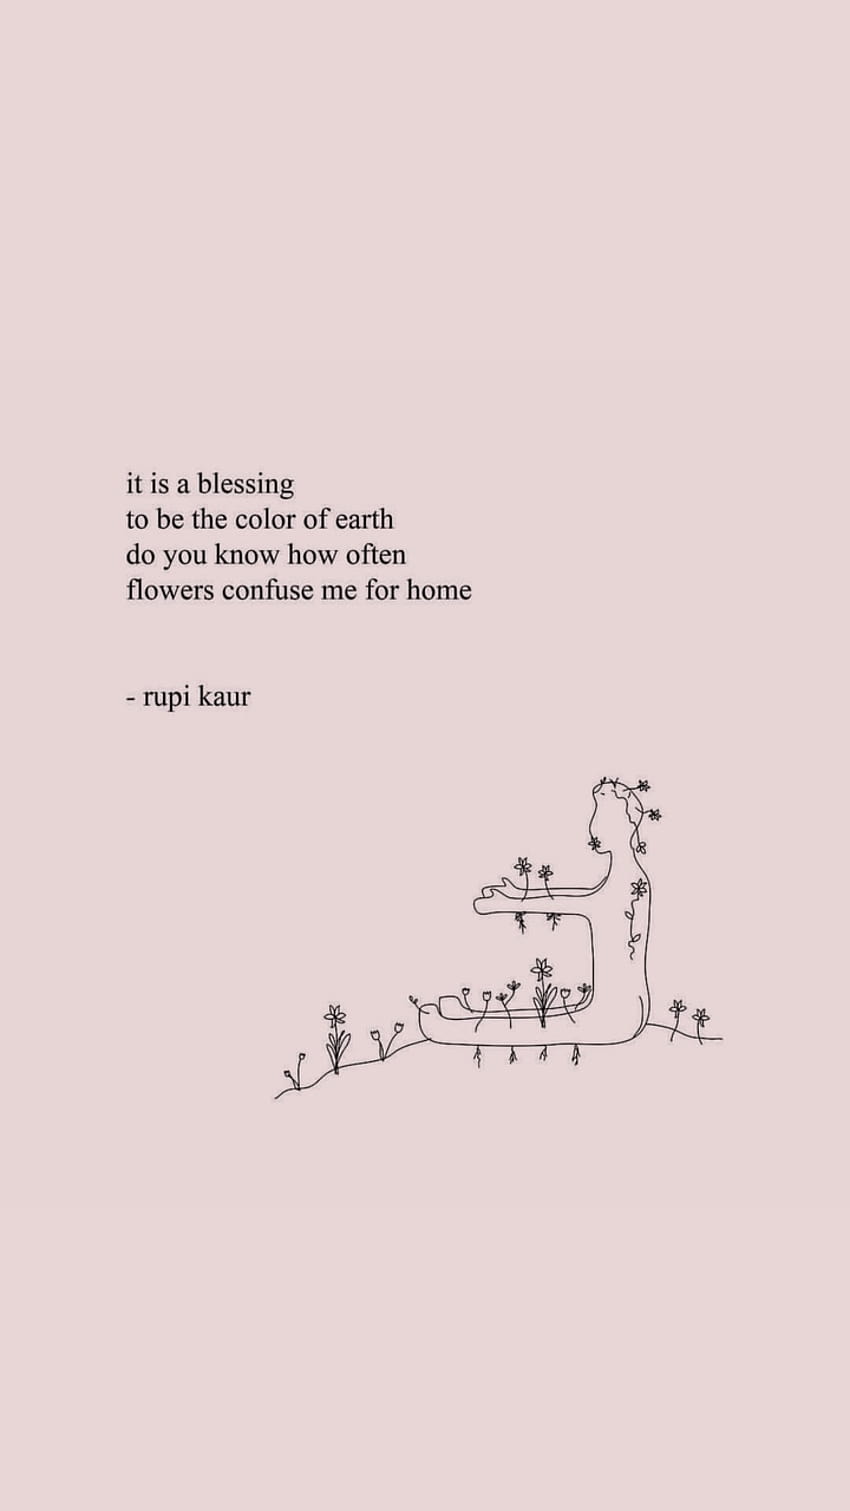 rupi kaur shared by spettro HD phone wallpaper